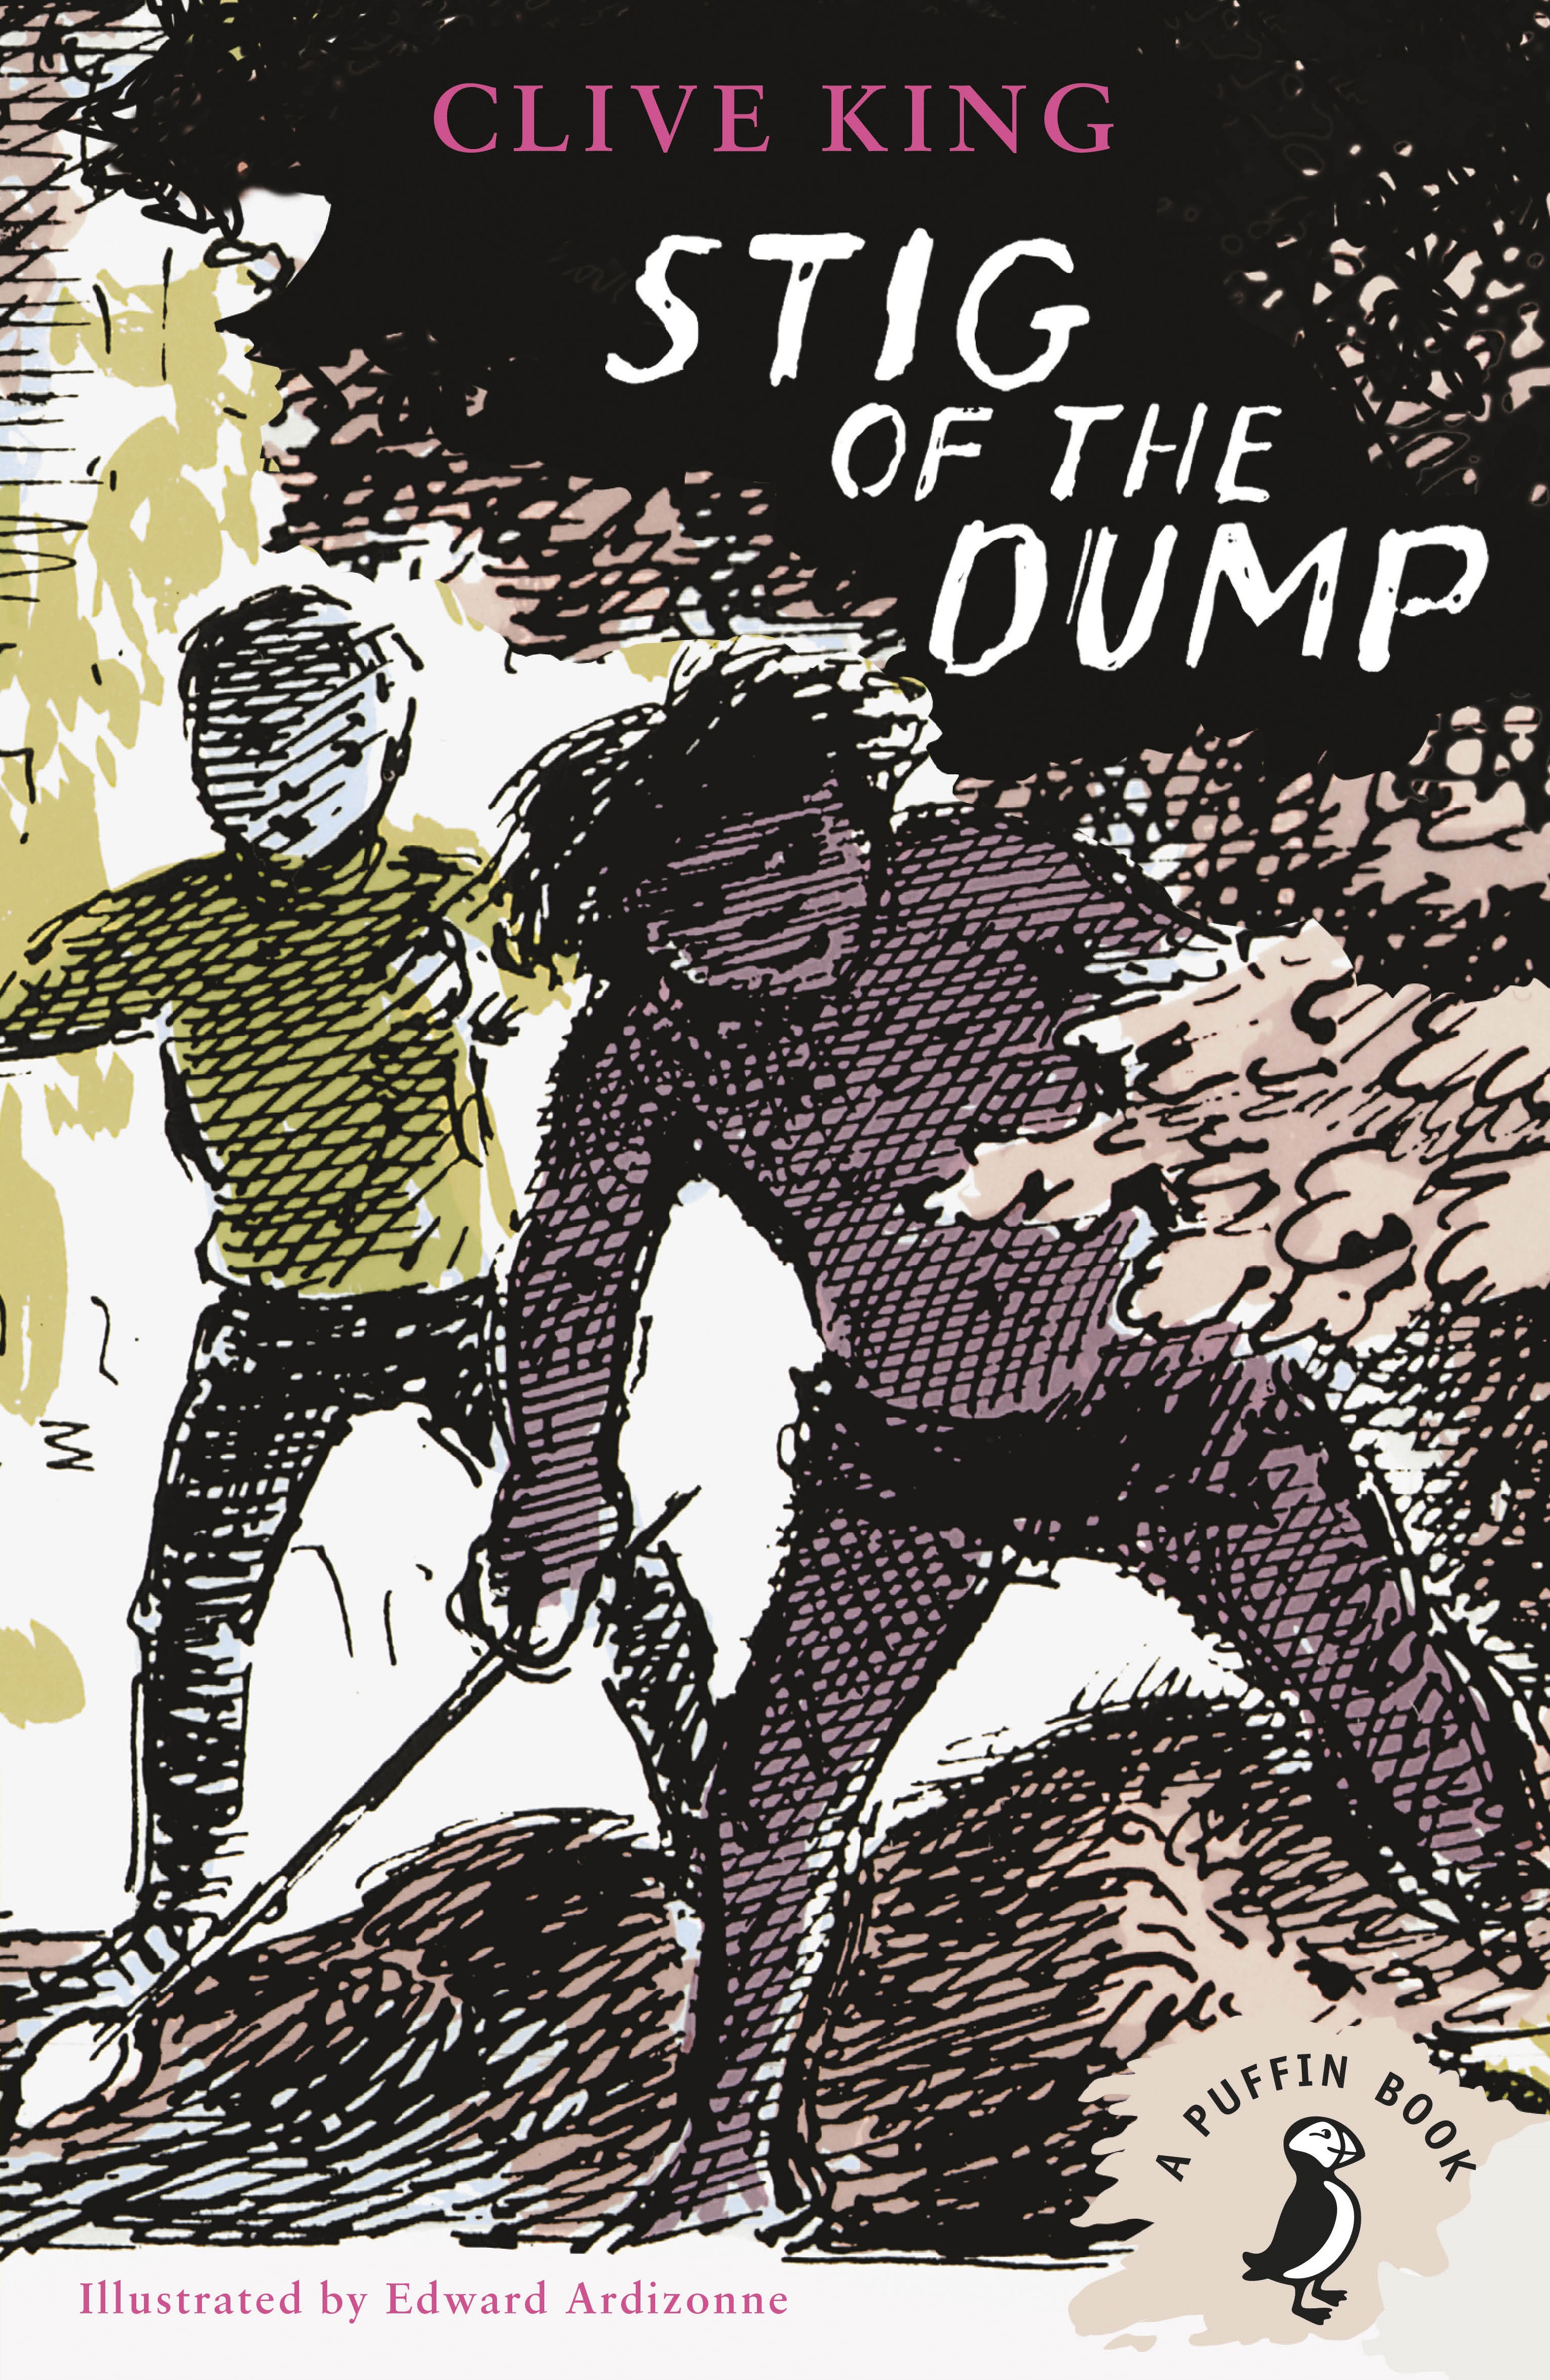 Clive King's Stig of the Dump